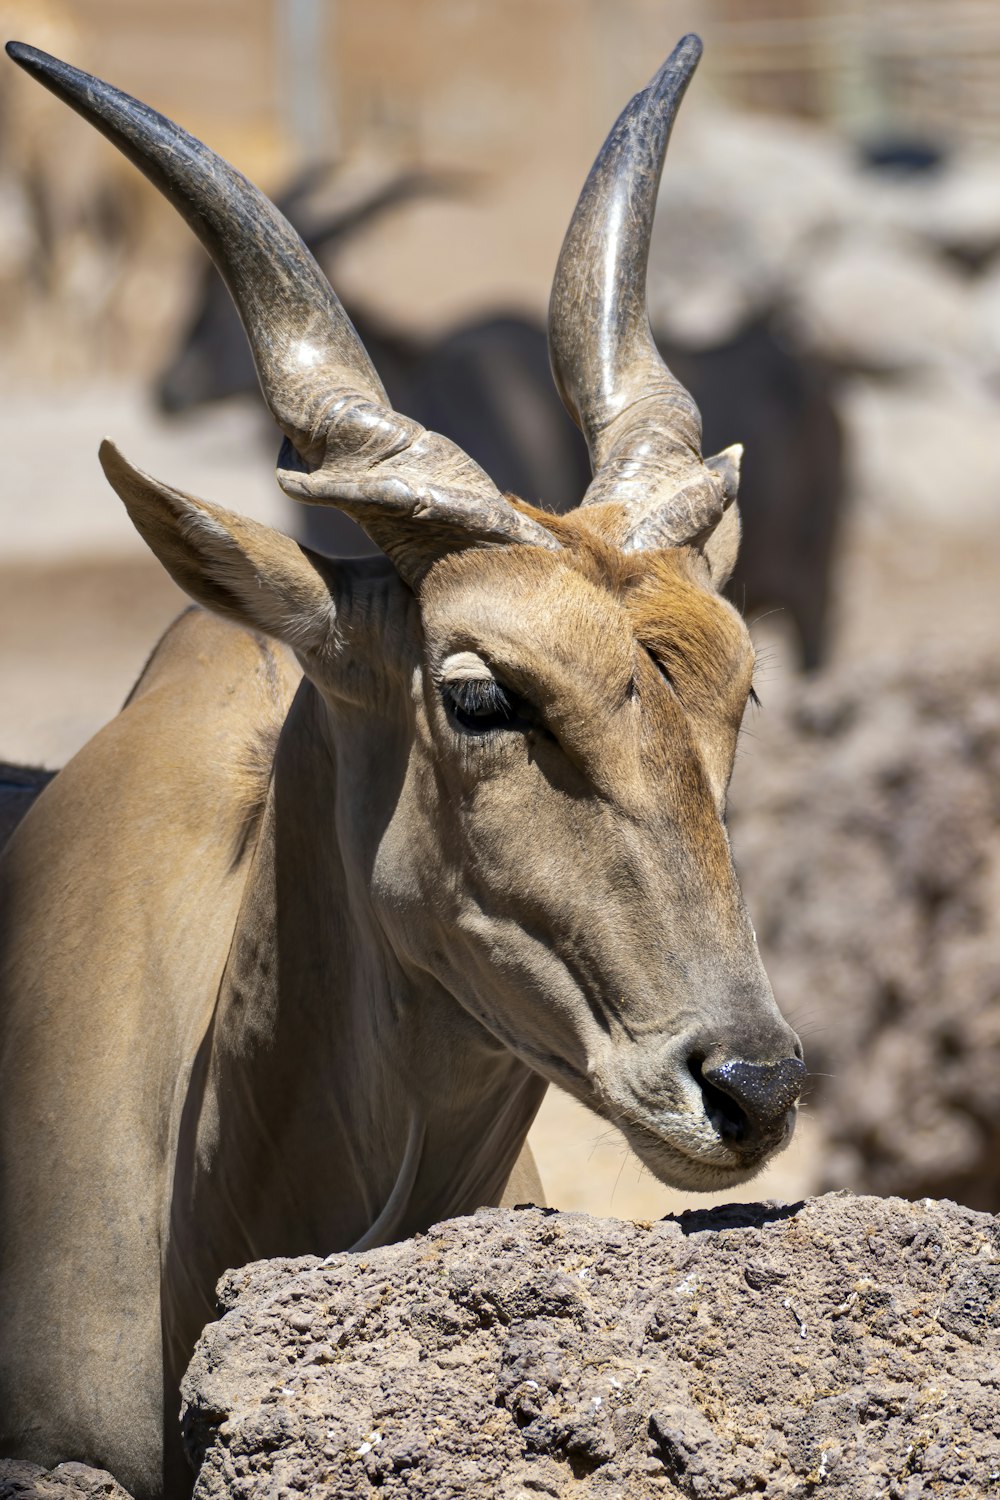 a close up of an animal with very long horns